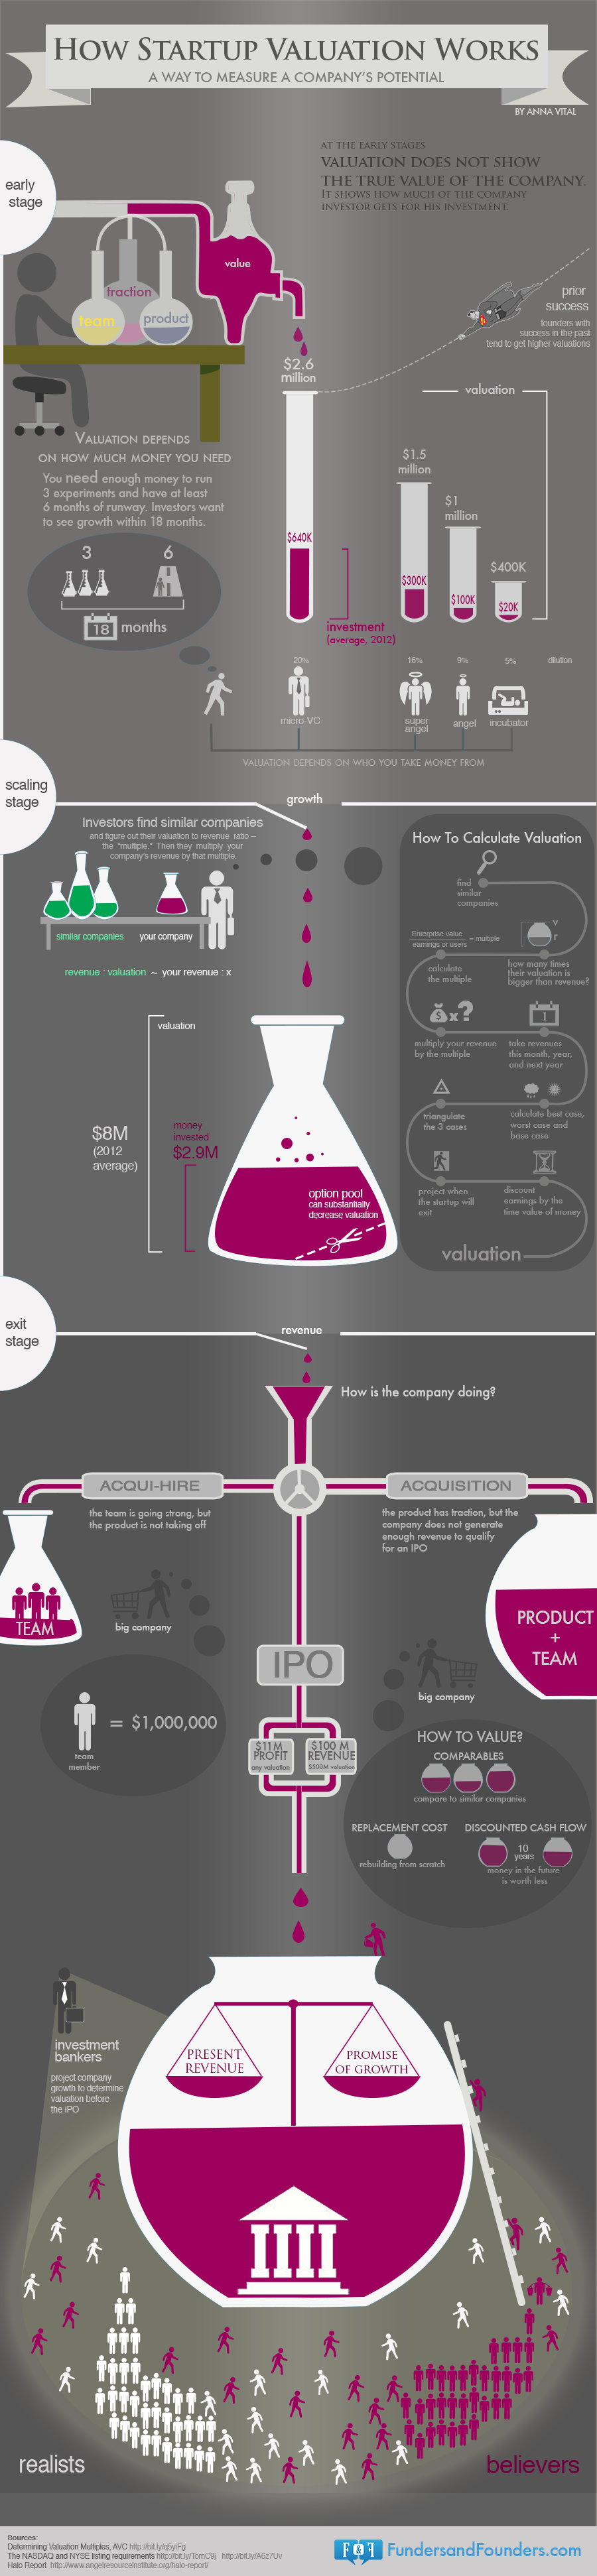 how-startup-valuation-works-infographic how to fund your startup funding startups funding startup